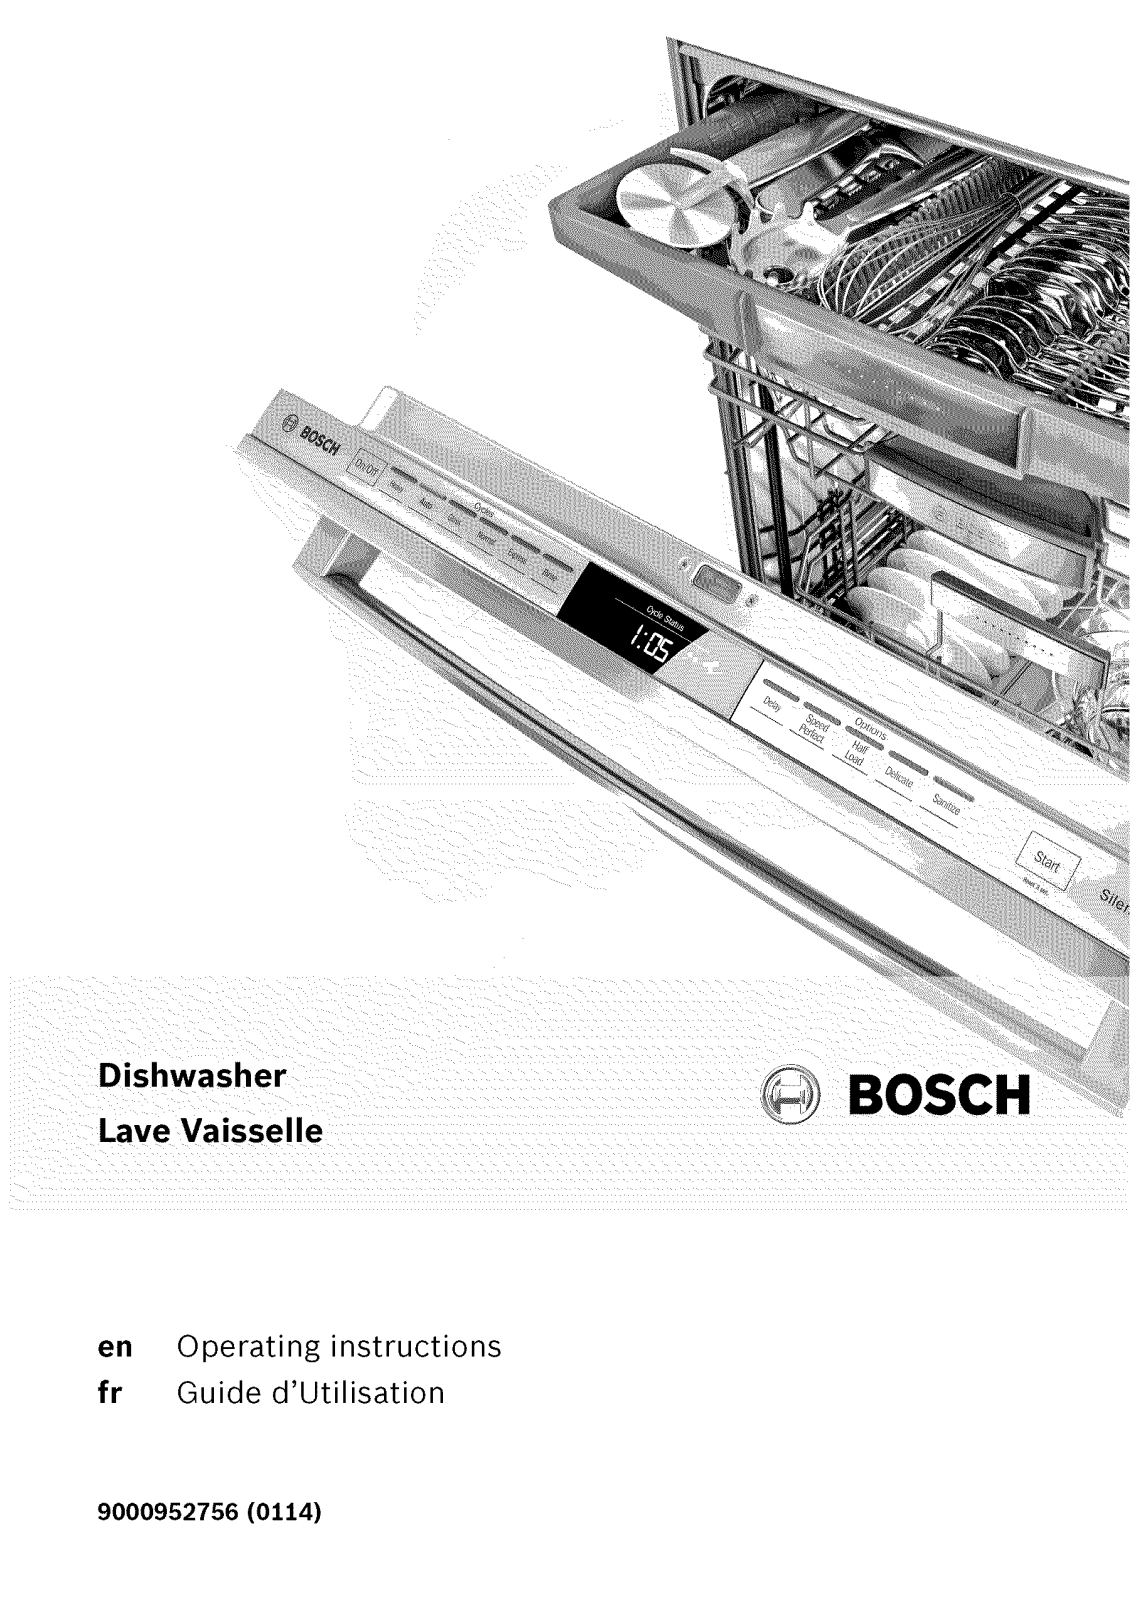 Bosch SHE53TF5UC/07, SHE53TF6UC/07, SHX53T55UC/07, SHV53T53UC/07, SHP53T55UC/07 Owner’s Manual